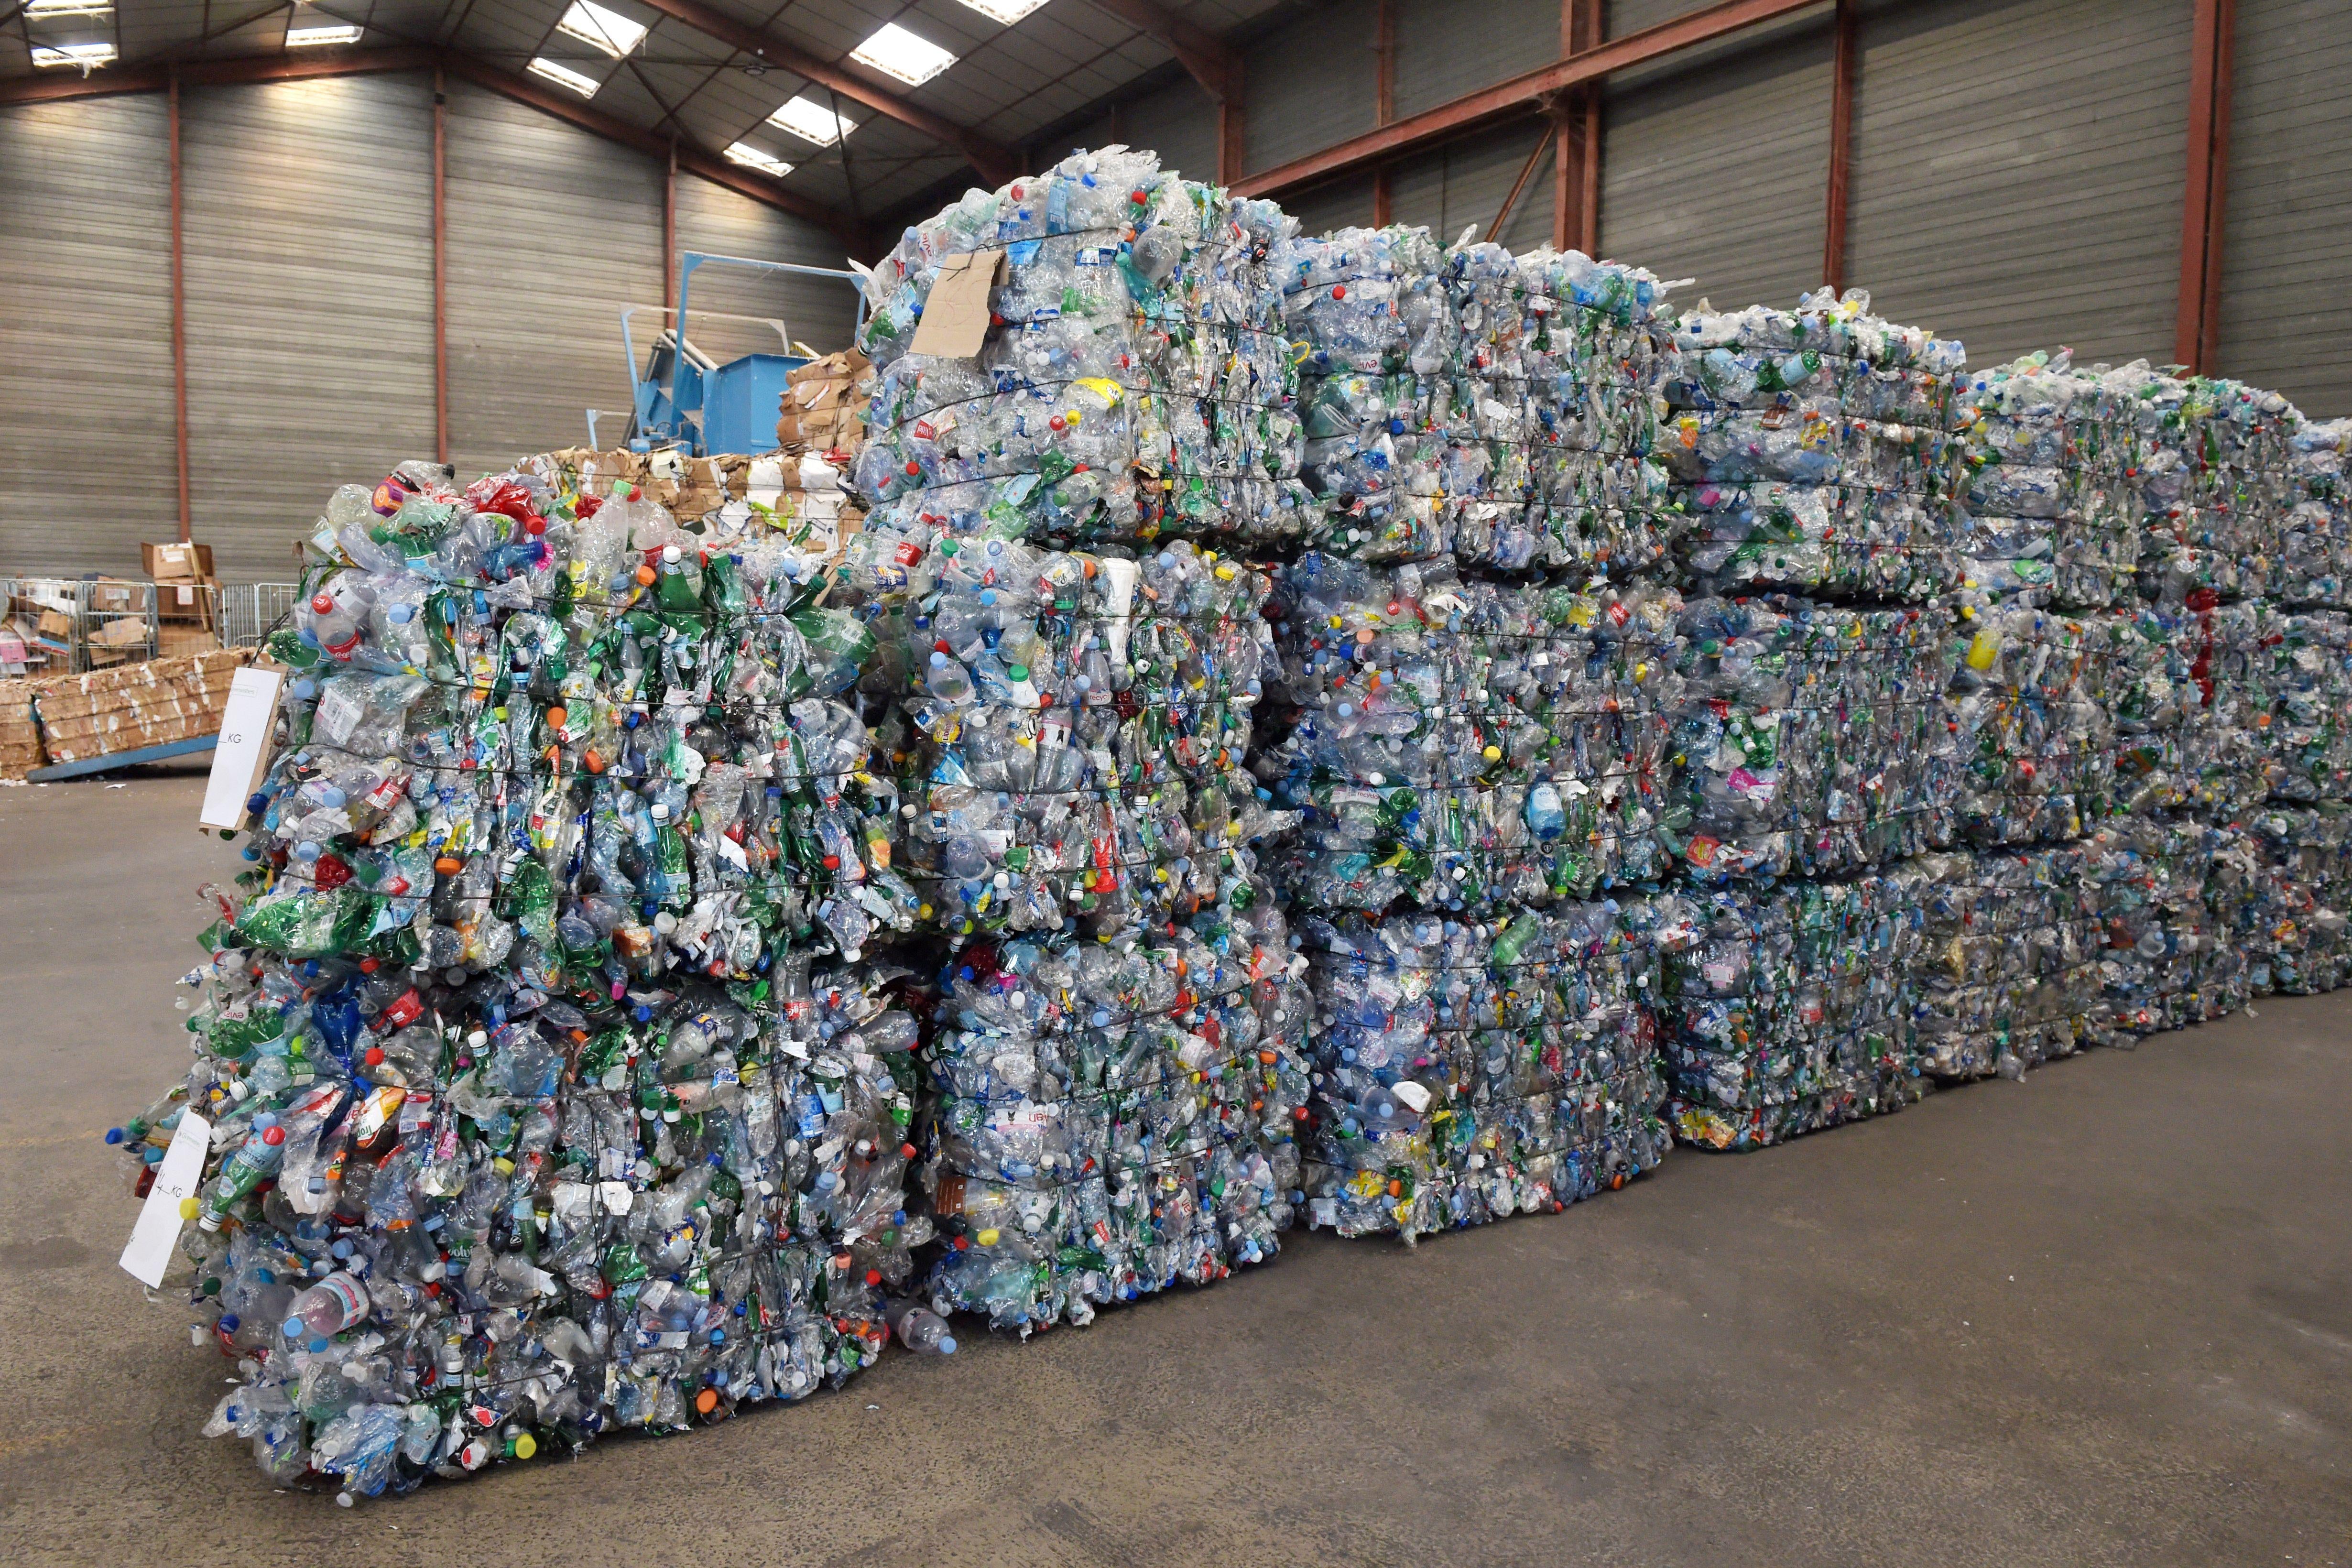 Piles of recyclable plastic bottles in a warehouse